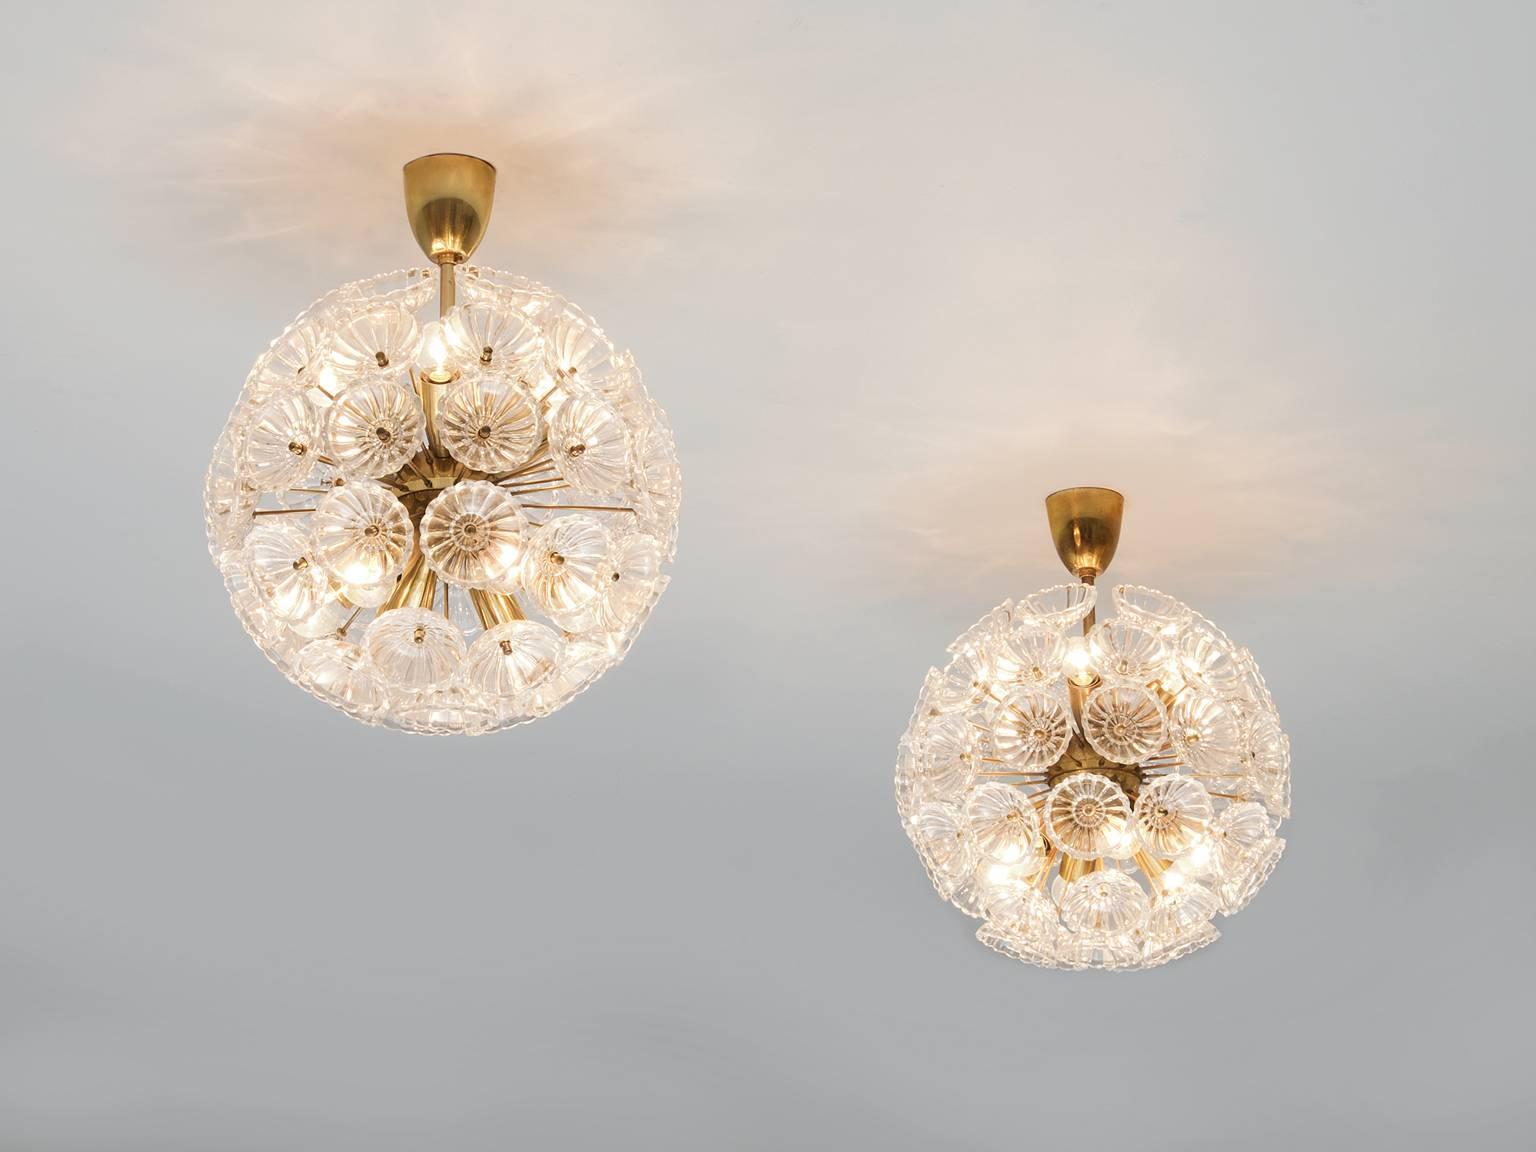 Sputnik chandeliers, in glass and brass, Austria, 1950s. 

Large brass 'flower' Sputnik chandeliers, made in Vienna in the 1950s, in the style of Emil Stejnar. The set consists of glass flowers with a brass frame that are playful and classic at the